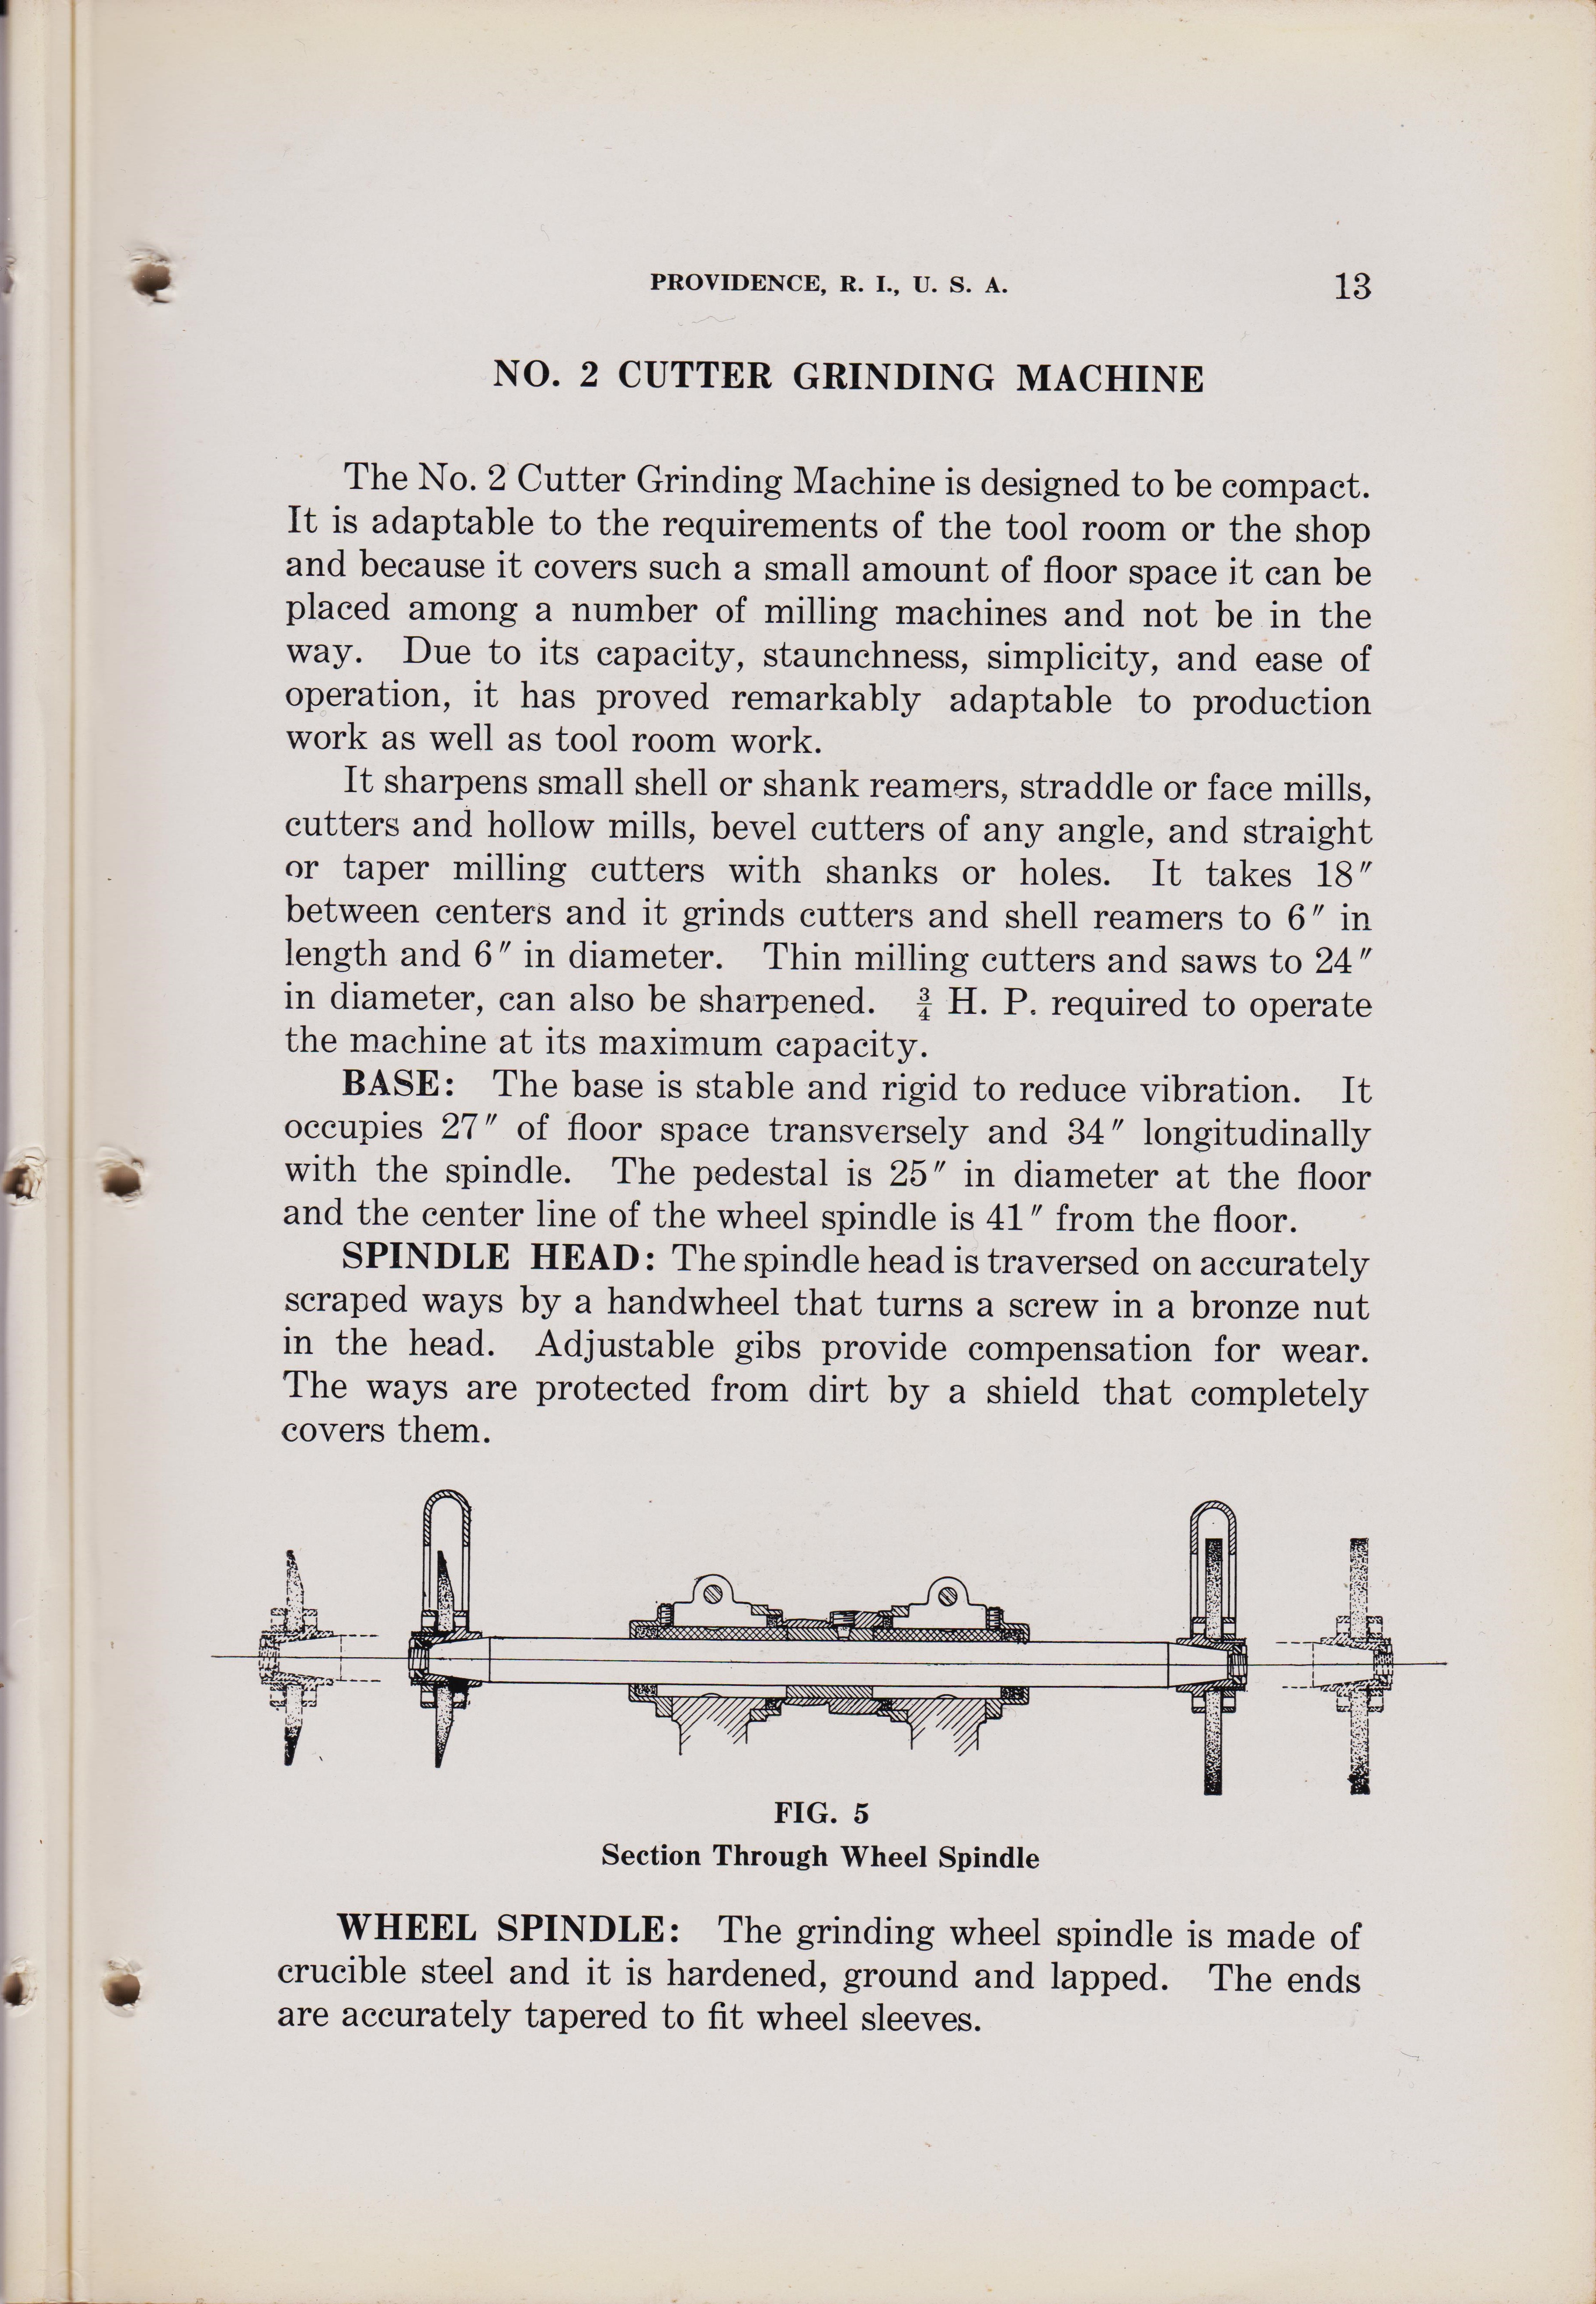 https://antiquemachinery.com/images-2020/Universal-Cutter-and-Reamer-Grinder-Machine-Brown-and-Sharpe-Mfg-Co-1929-No2-No3-pg-13.jpeg